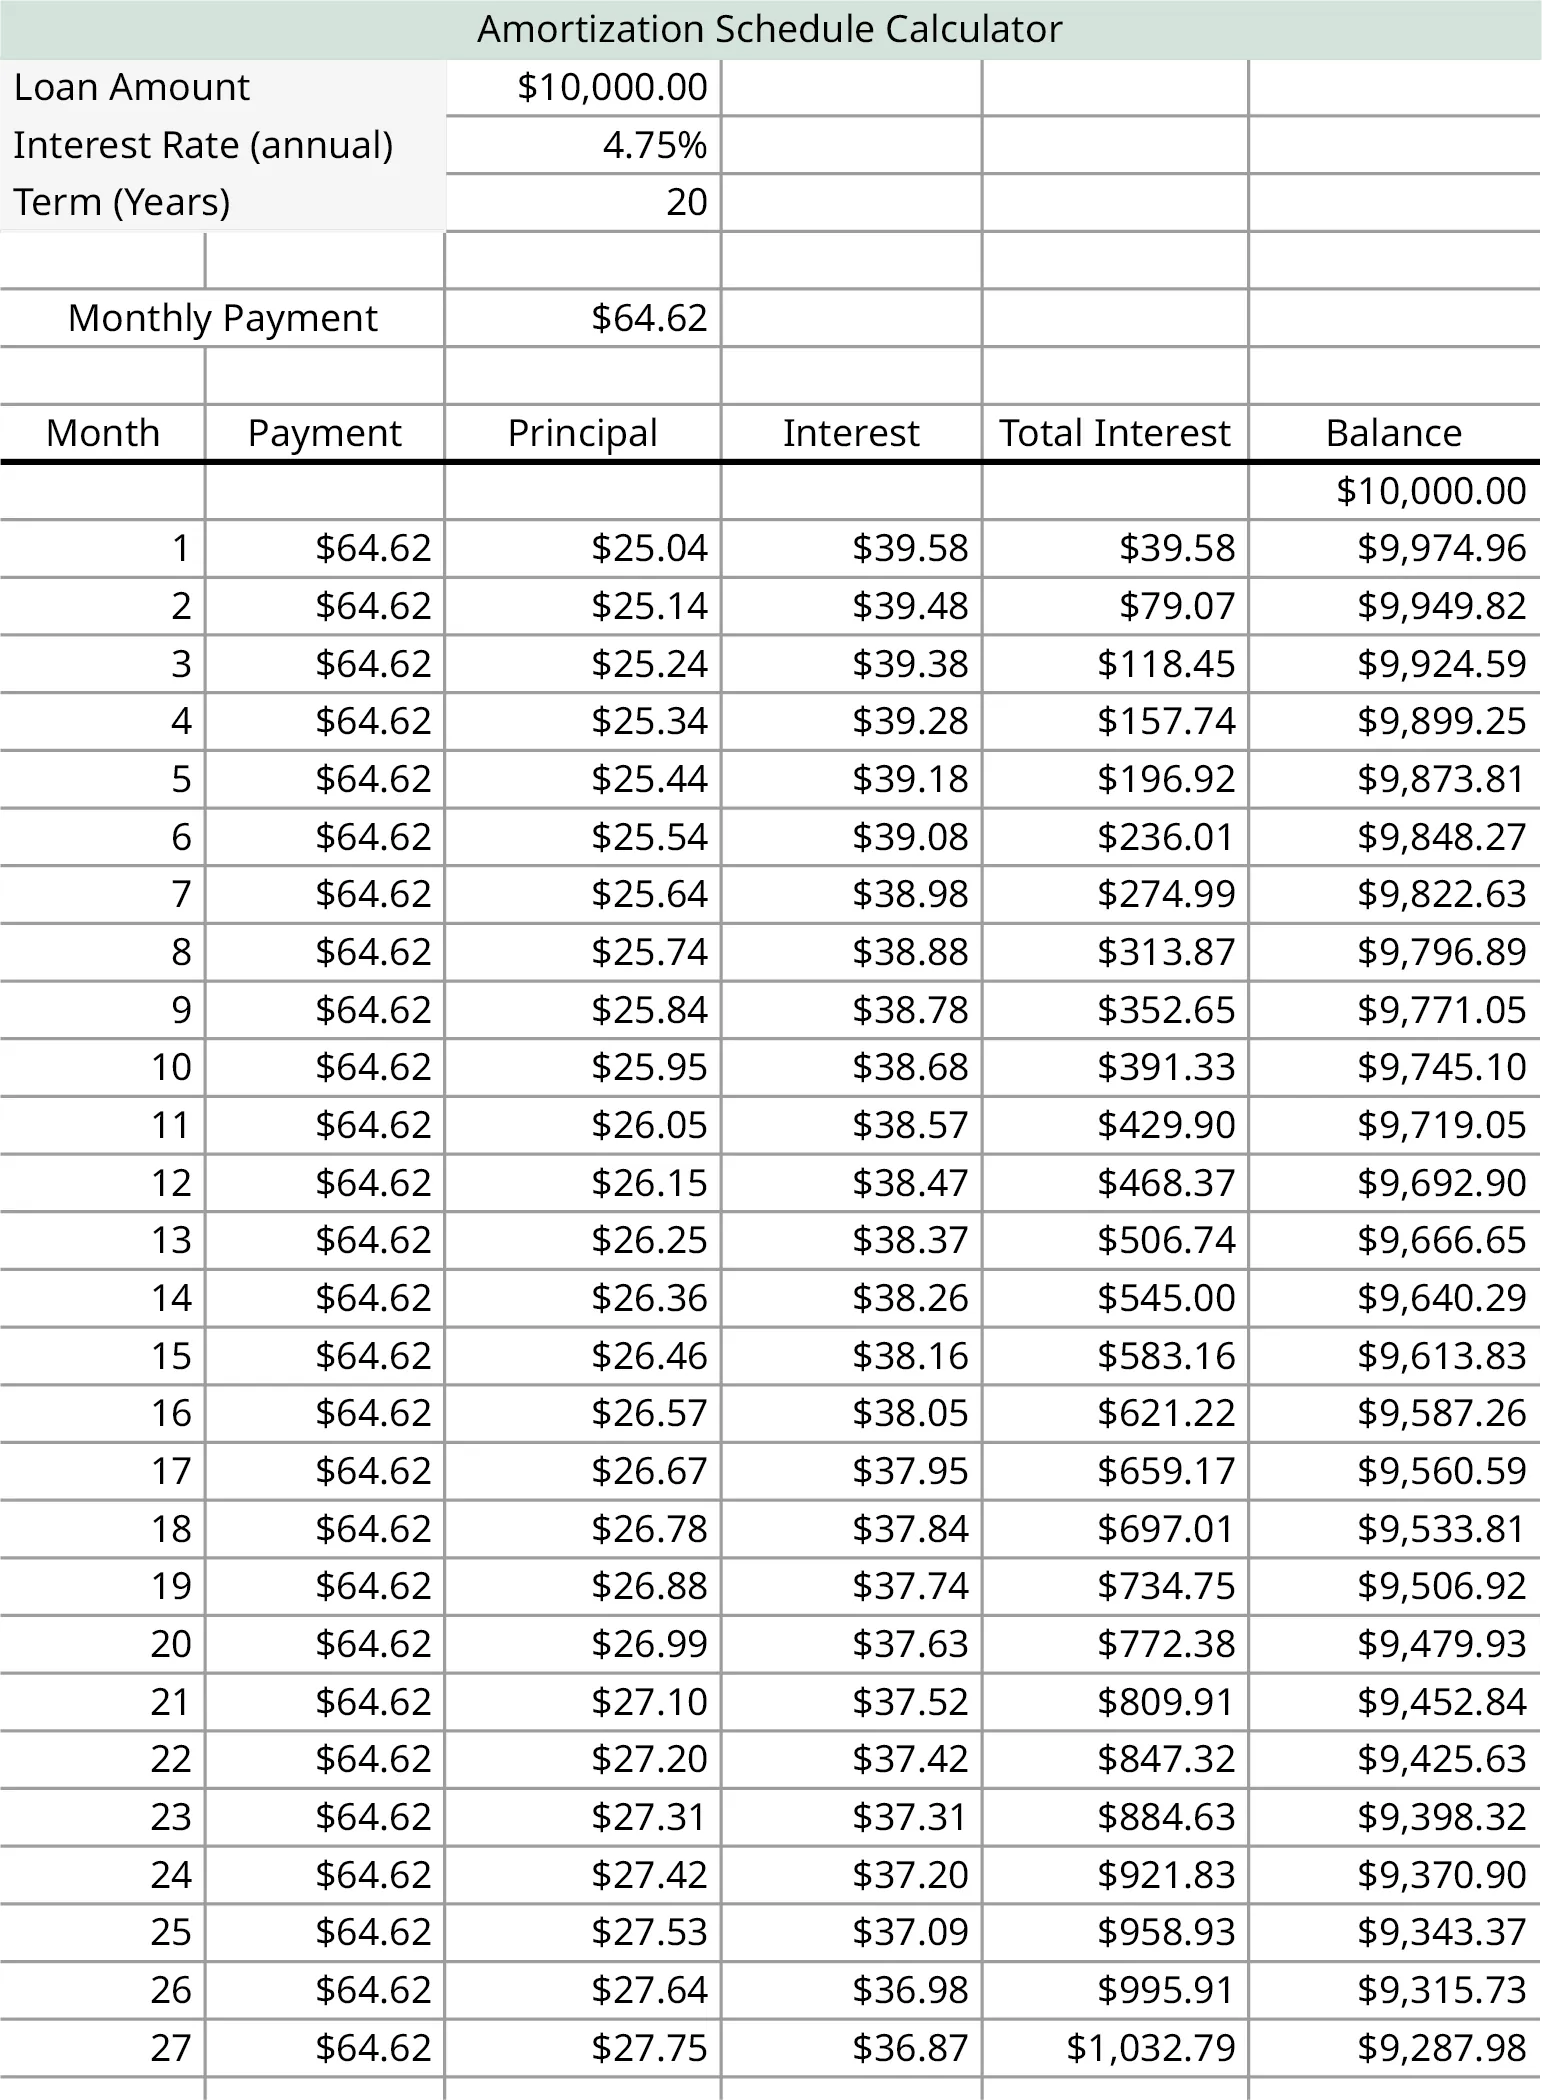 A spreadsheet labeled as amortization schedule calculator. The sheet calculates the repayment for the loan amount of $10,000.00 for the interest rate 4.75 percent annually and the monthly payment is $64.62. The factors include calculations such as month, payment, principal, interest, total and interest and balance.